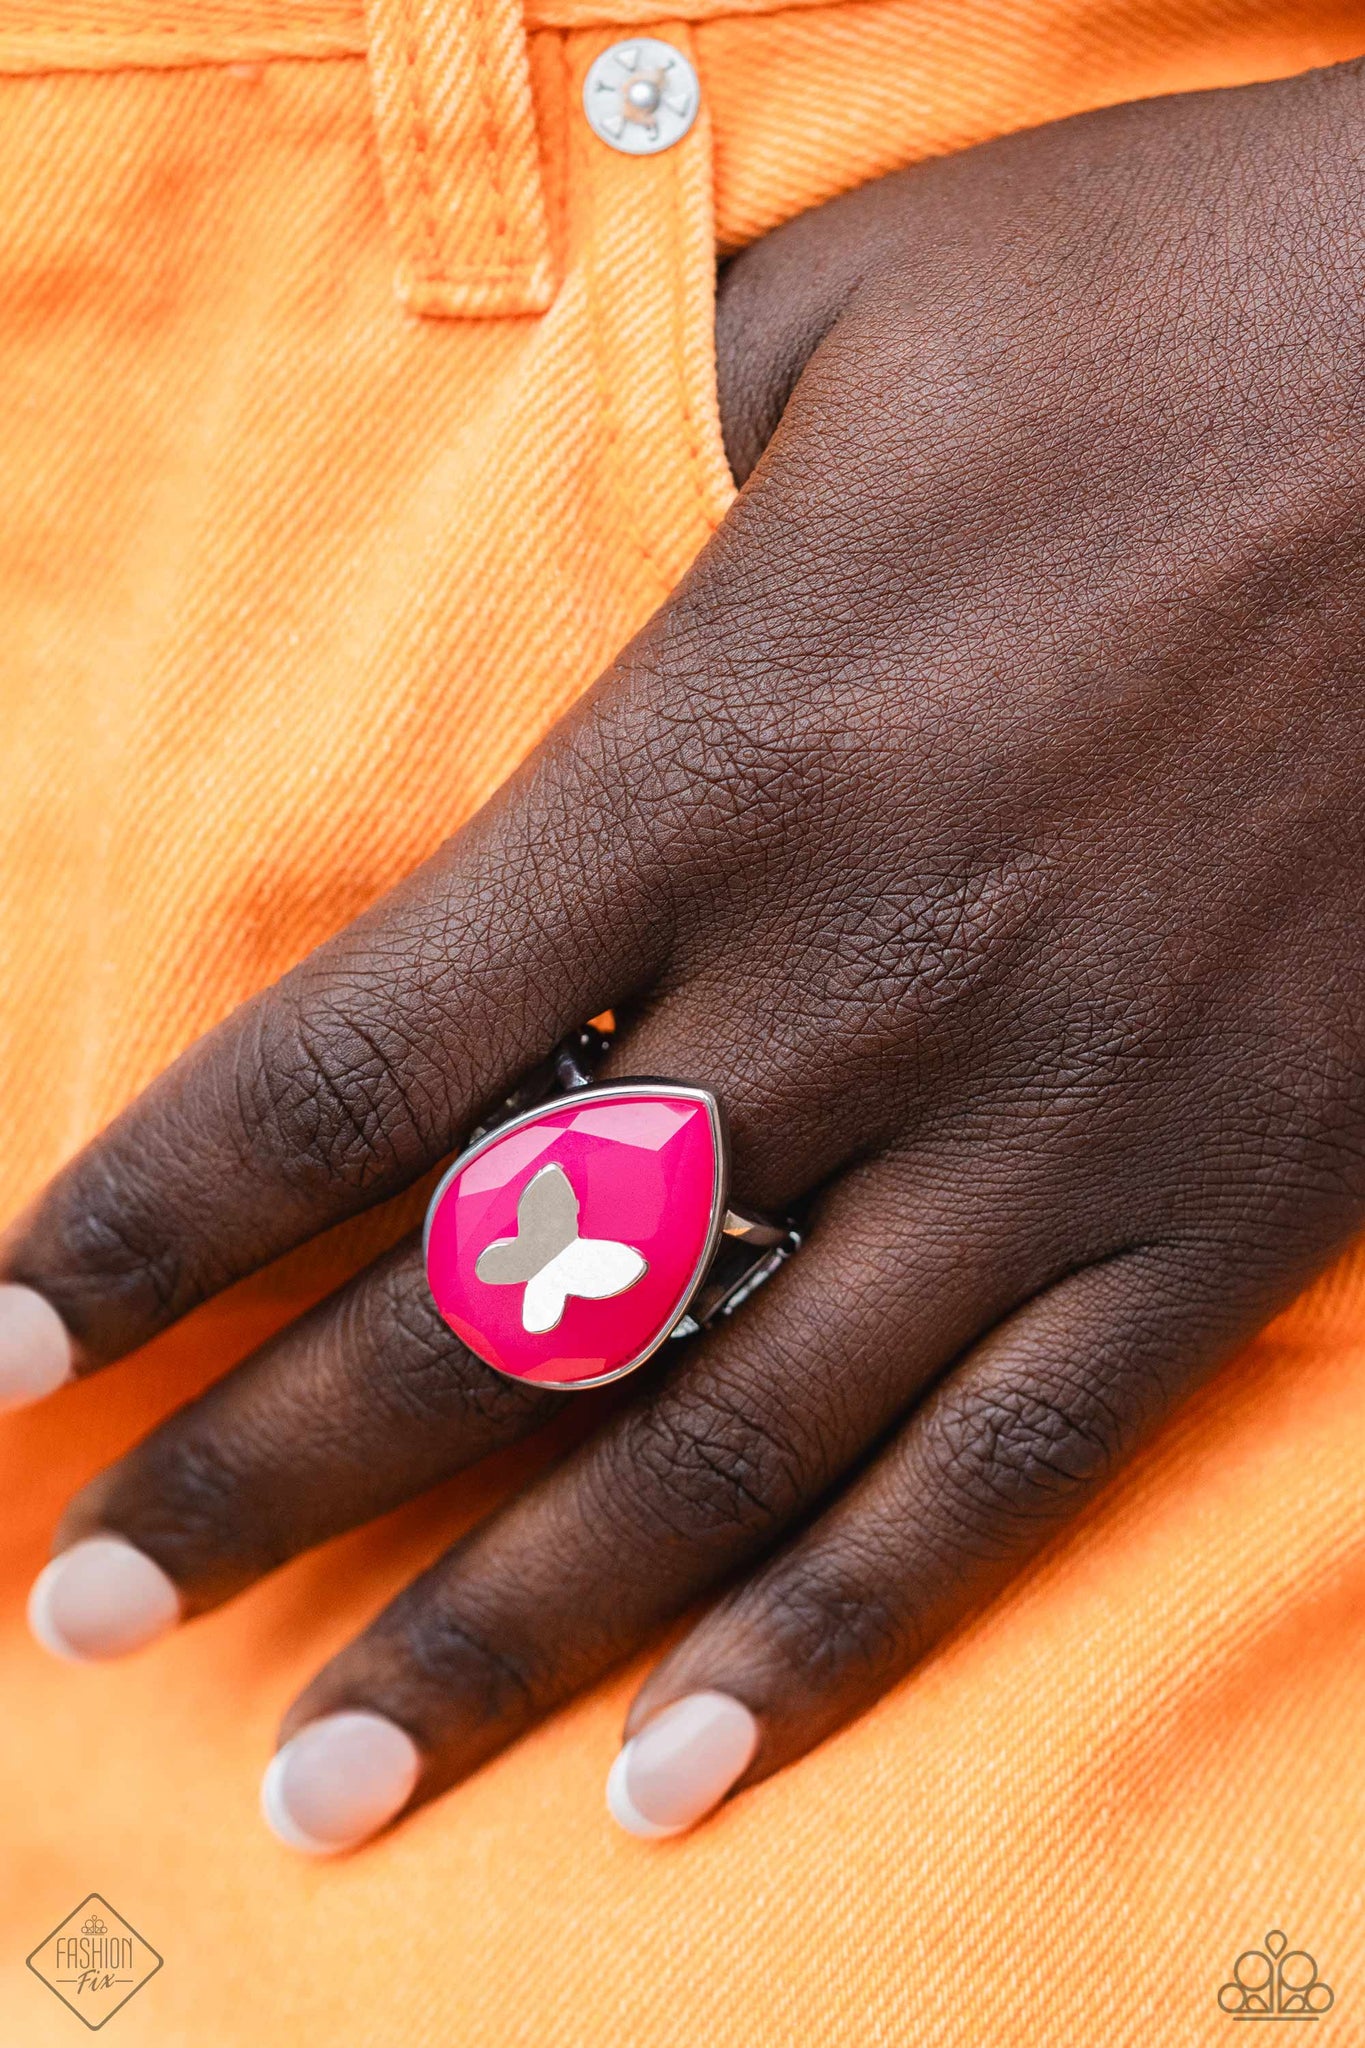 Paparazzi Ring - In Plain BRIGHT - Pink